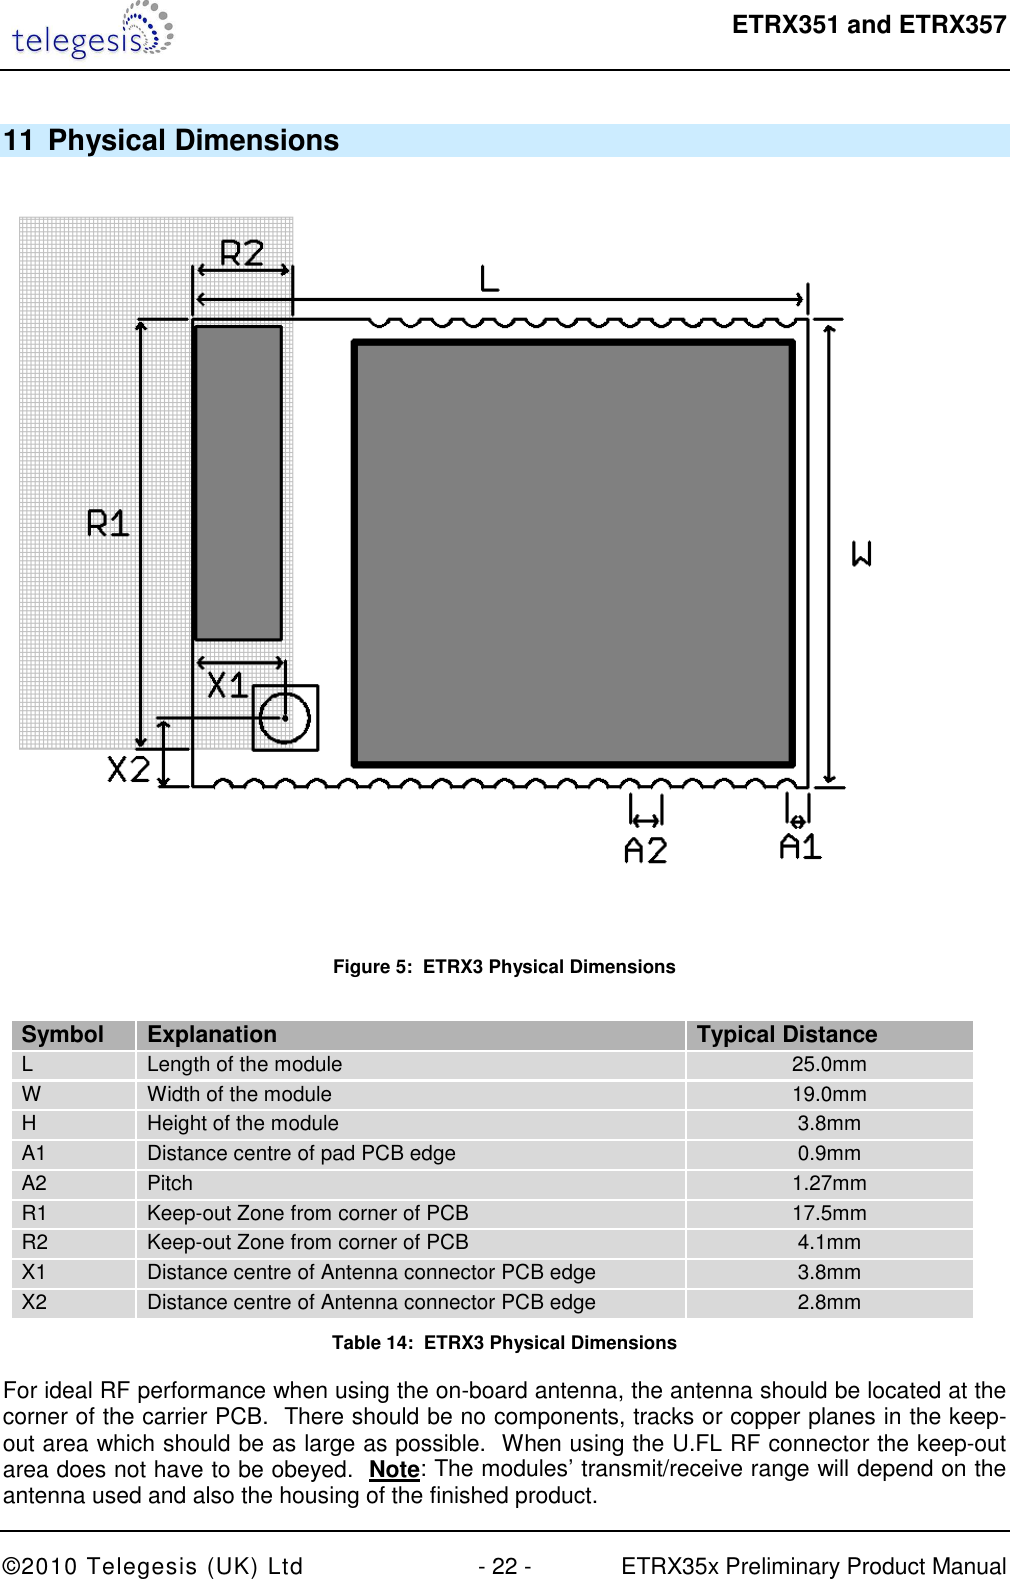  ETRX351 and ETRX357  ©2010 Telegesis (UK) Ltd  - 22 -  ETRX35x Preliminary Product Manual 11 Physical Dimensions  Figure 5:  ETRX3 Physical Dimensions  Symbol  Explanation  Typical Distance  L   Length of the module   25.0mm  W   Width of the module   19.0mm  H   Height of the module   3.8mm  A1   Distance centre of pad PCB edge  0.9mm  A2  Pitch   1.27mm  R1   Keep-out Zone from corner of PCB   17.5mm  R2   Keep-out Zone from corner of PCB   4.1mm  X1   Distance centre of Antenna connector PCB edge   3.8mm  X2   Distance centre of Antenna connector PCB edge   2.8mm  Table 14:  ETRX3 Physical Dimensions For ideal RF performance when using the on-board antenna, the antenna should be located at the corner of the carrier PCB.  There should be no components, tracks or copper planes in the keep-out area which should be as large as possible.  When using the U.FL RF connector the keep-out area does not have to be obeyed.  Note: The modules’ transmit/receive range will depend on the antenna used and also the housing of the finished product. 